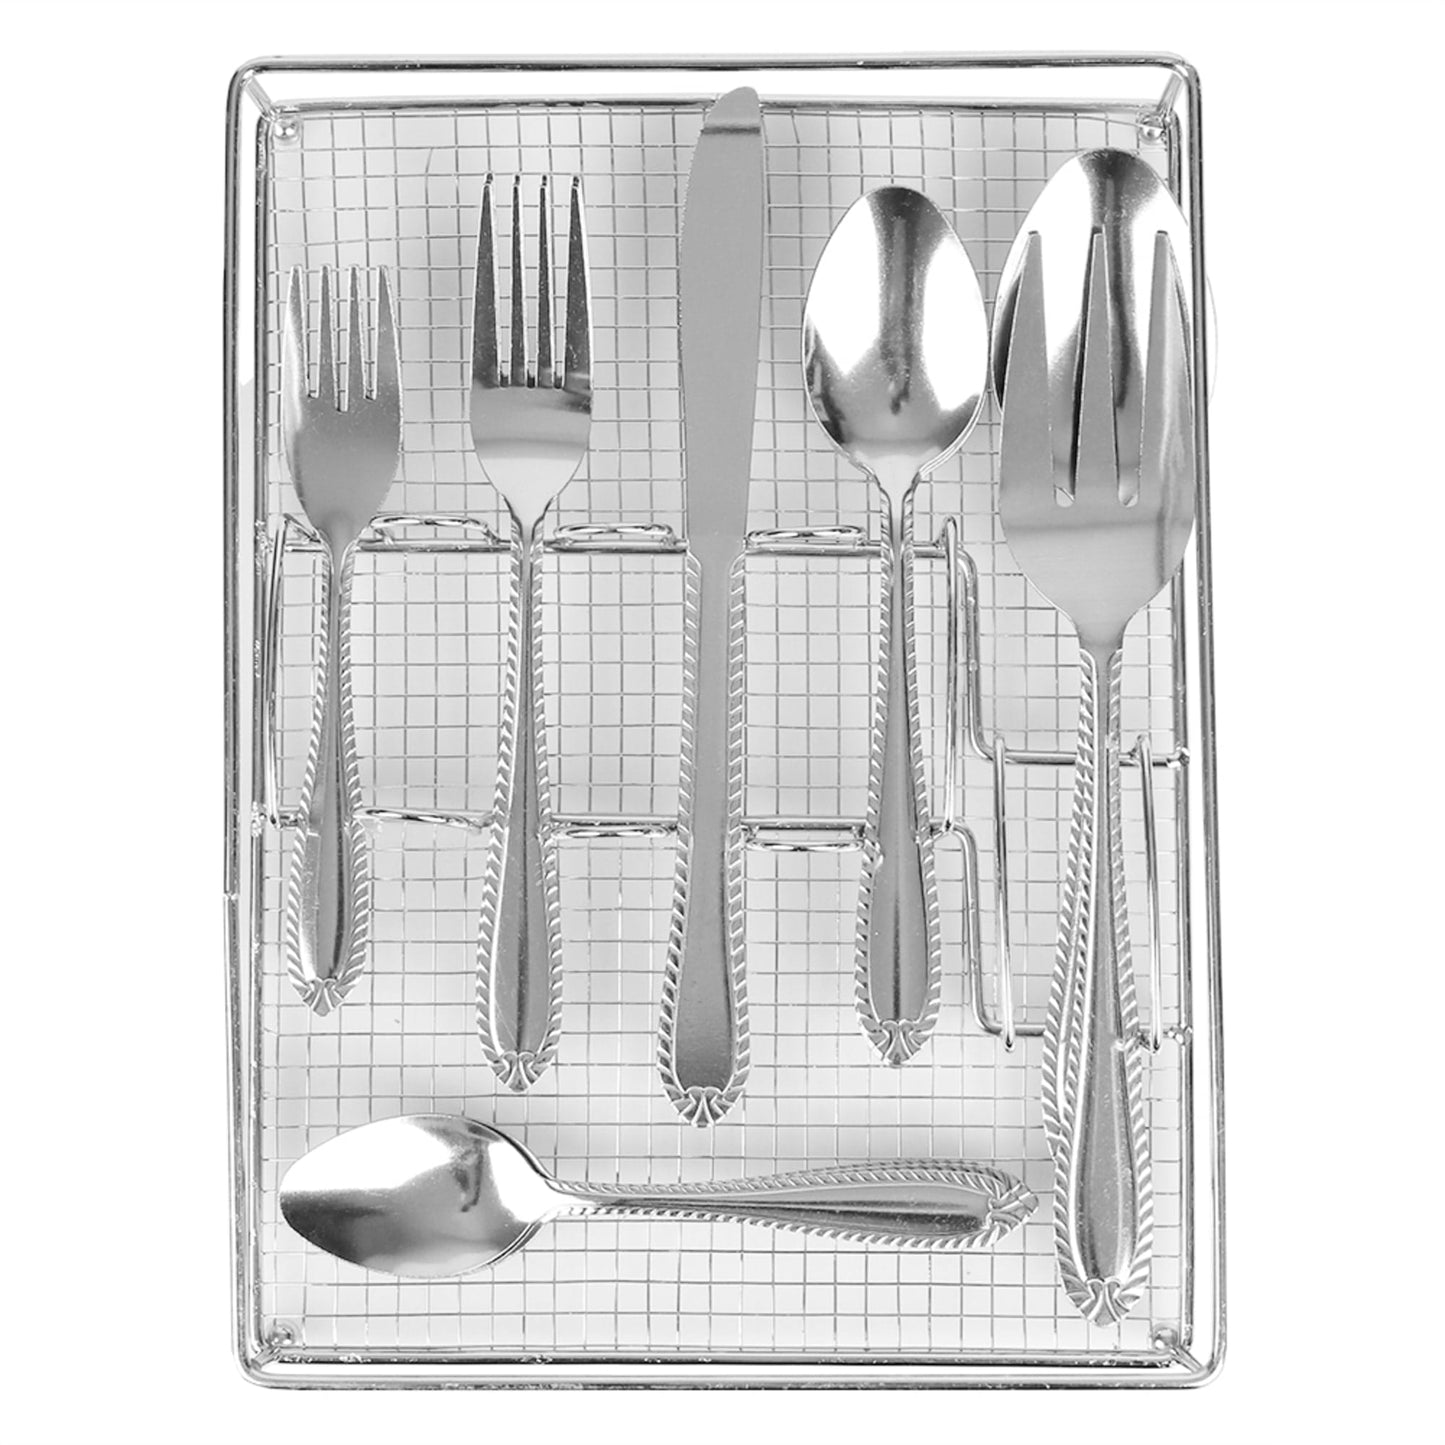 22 Piece Stainless Steel Flatware Entertaining Set with Cutlery Tray, Silver